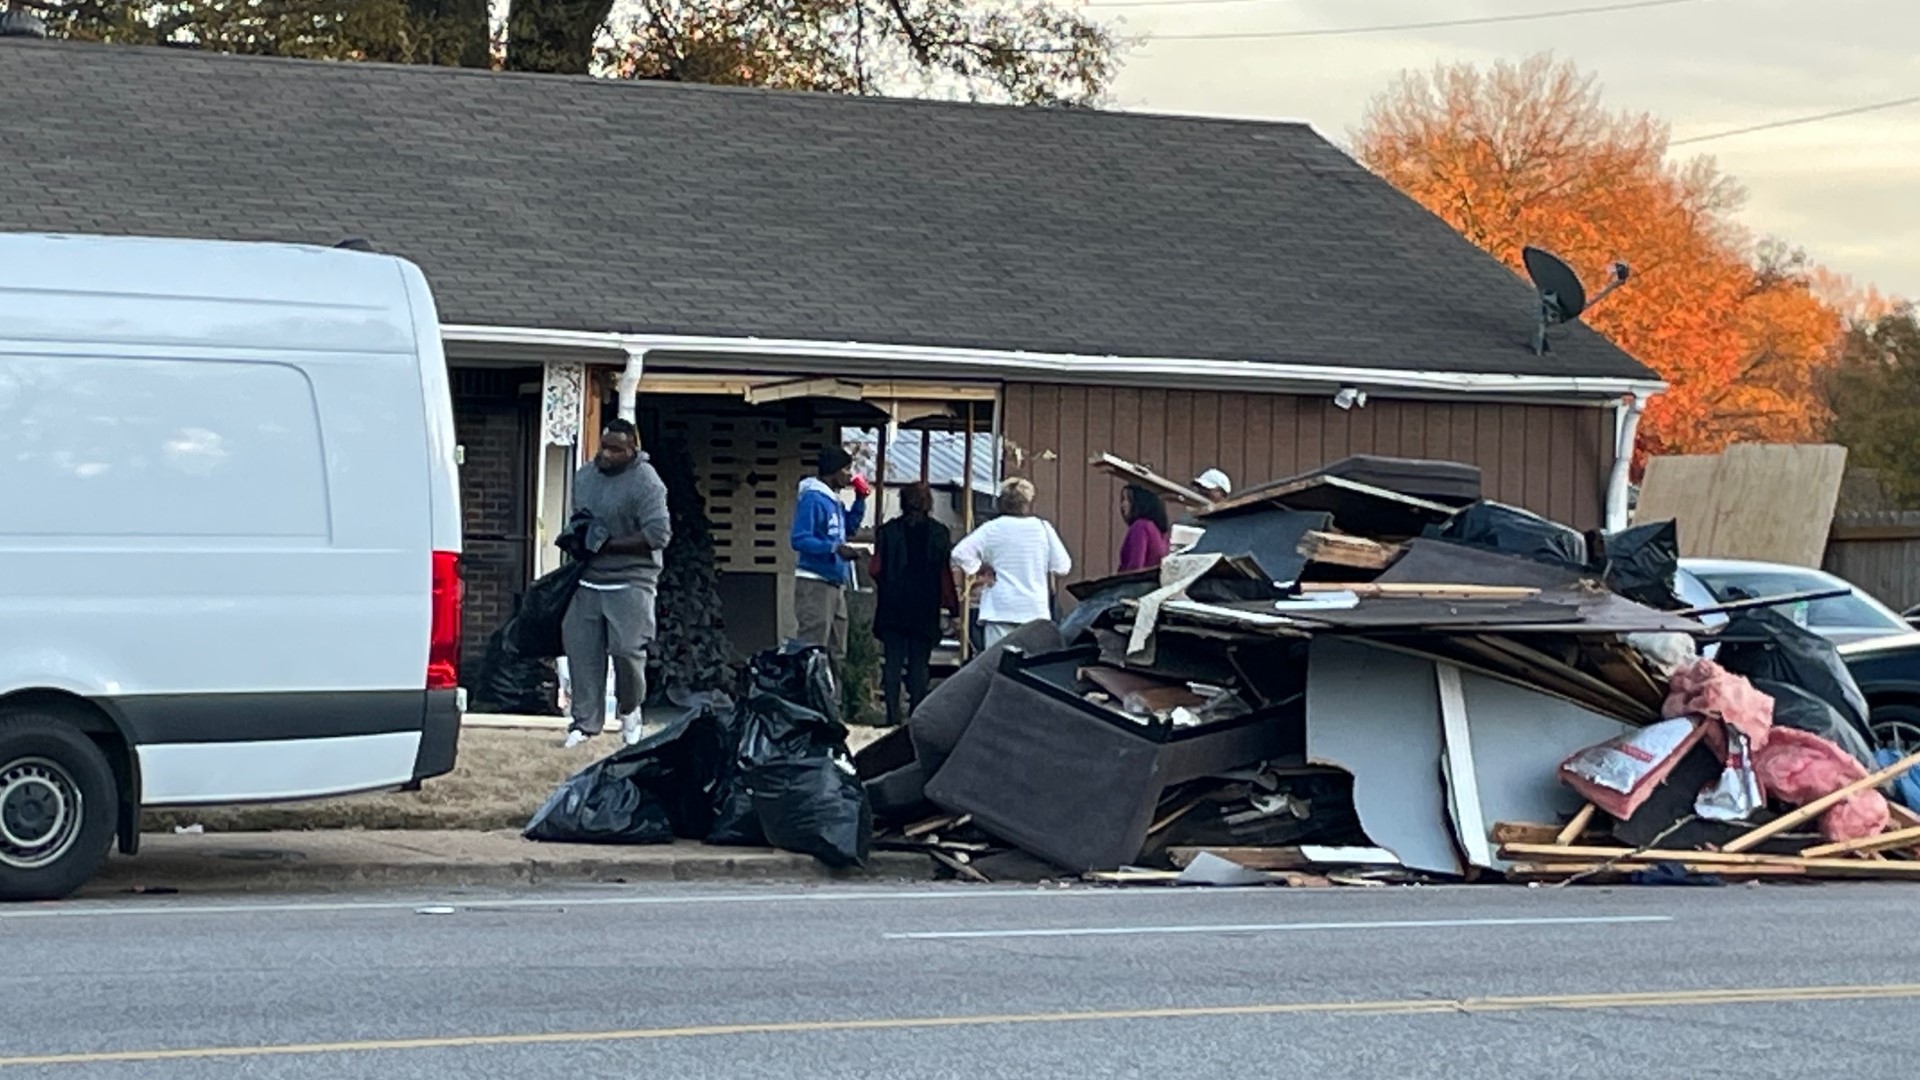 Late Saturday night, a vehicle struck a home near the Alta Vista neighborhood and killed one person, according to the Memphis Police Department.